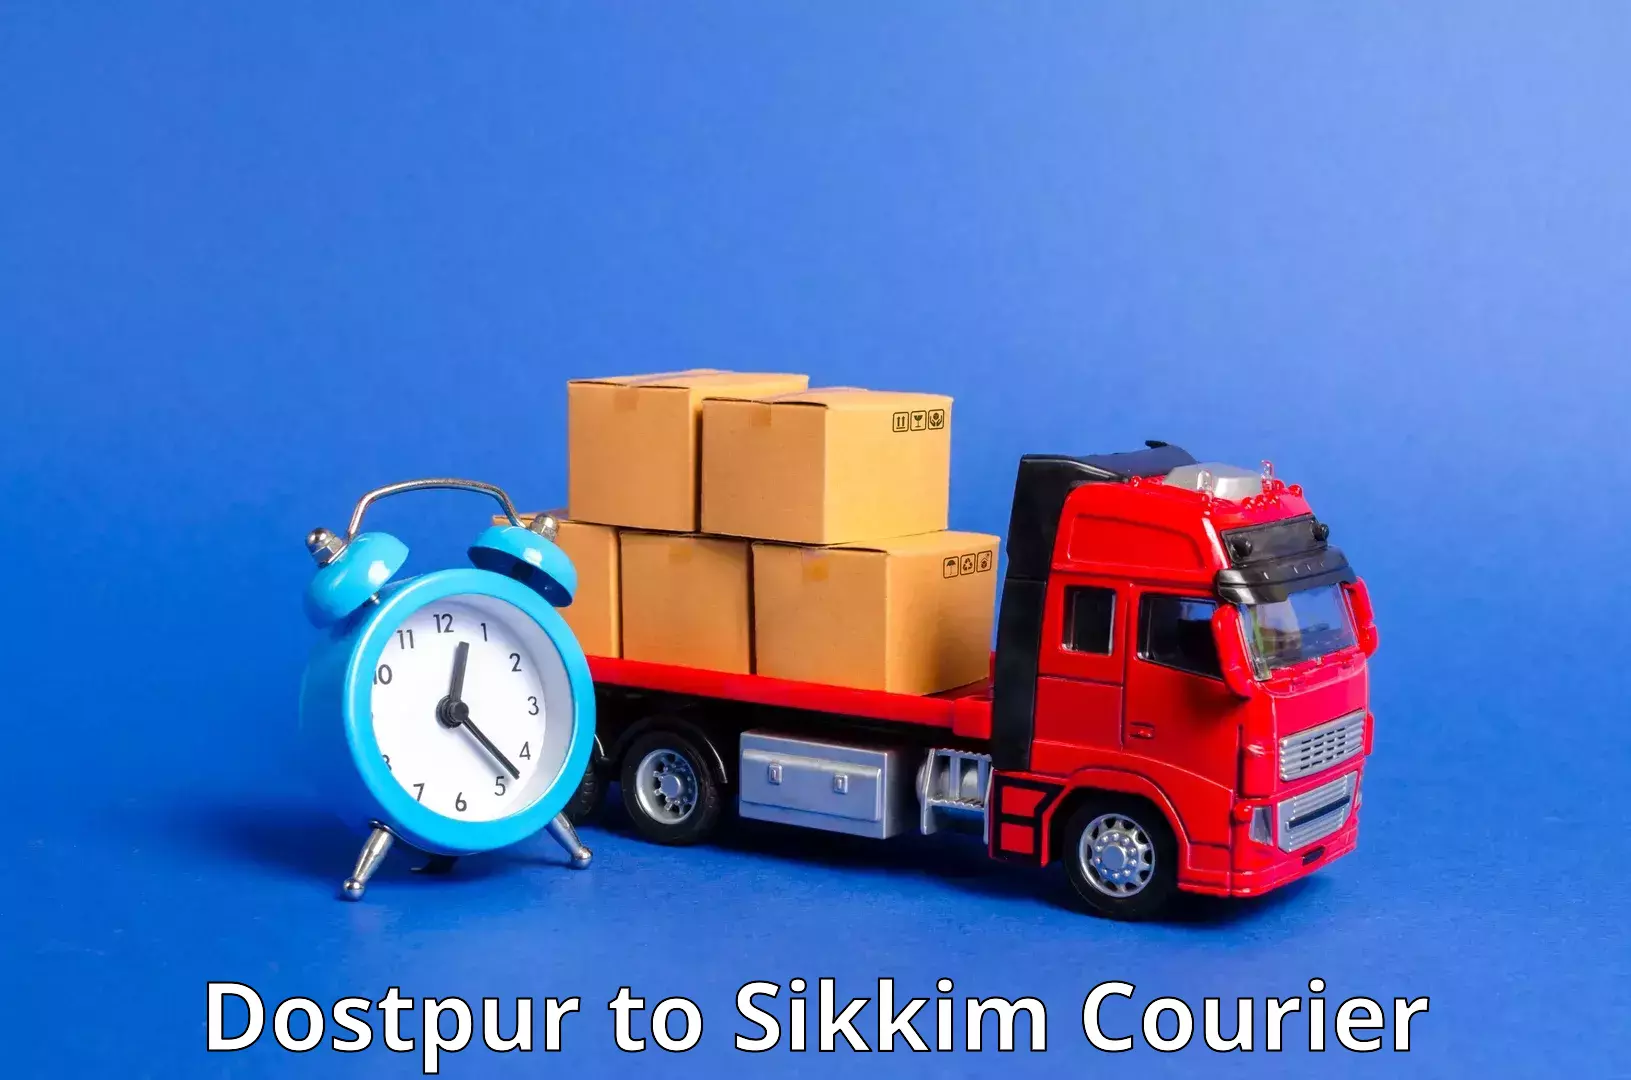 Express delivery capabilities Dostpur to Sikkim